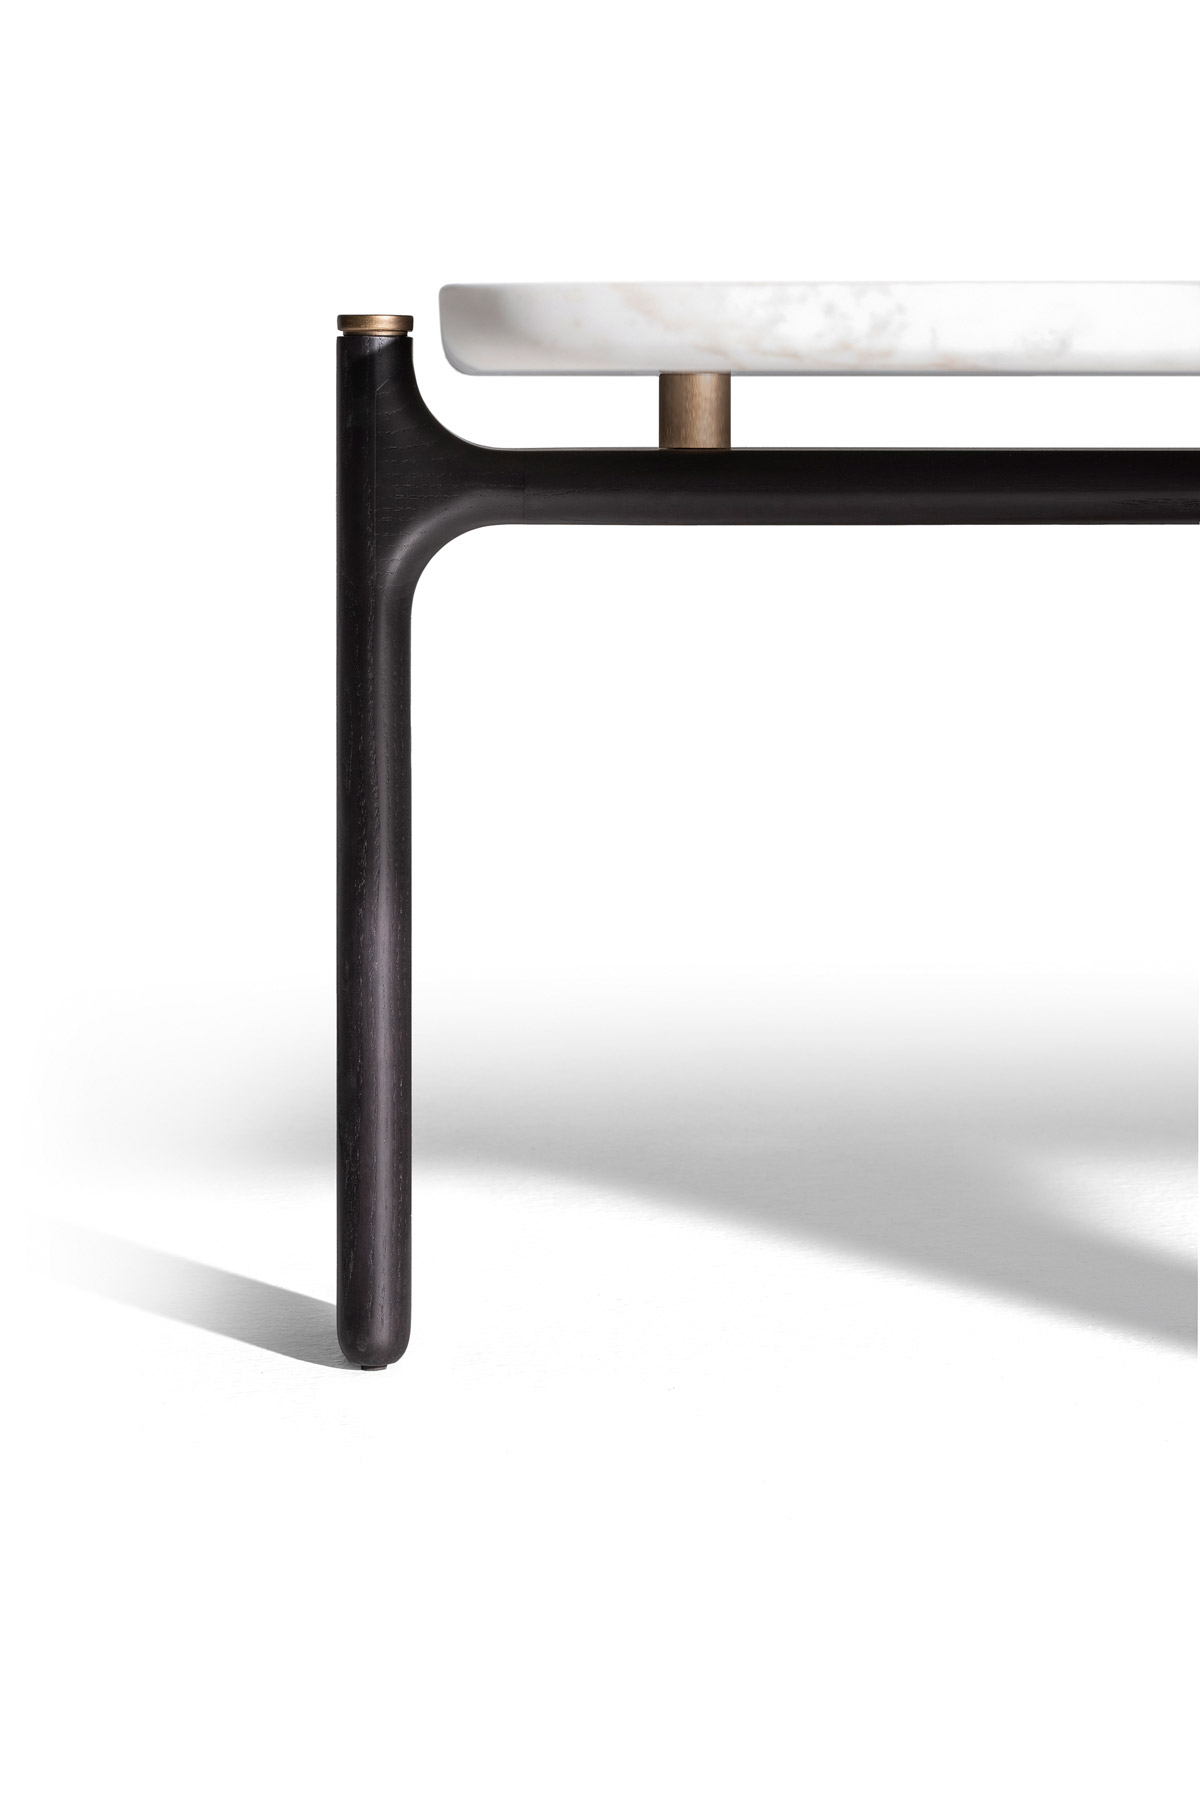 DUO | Low table (total marble)